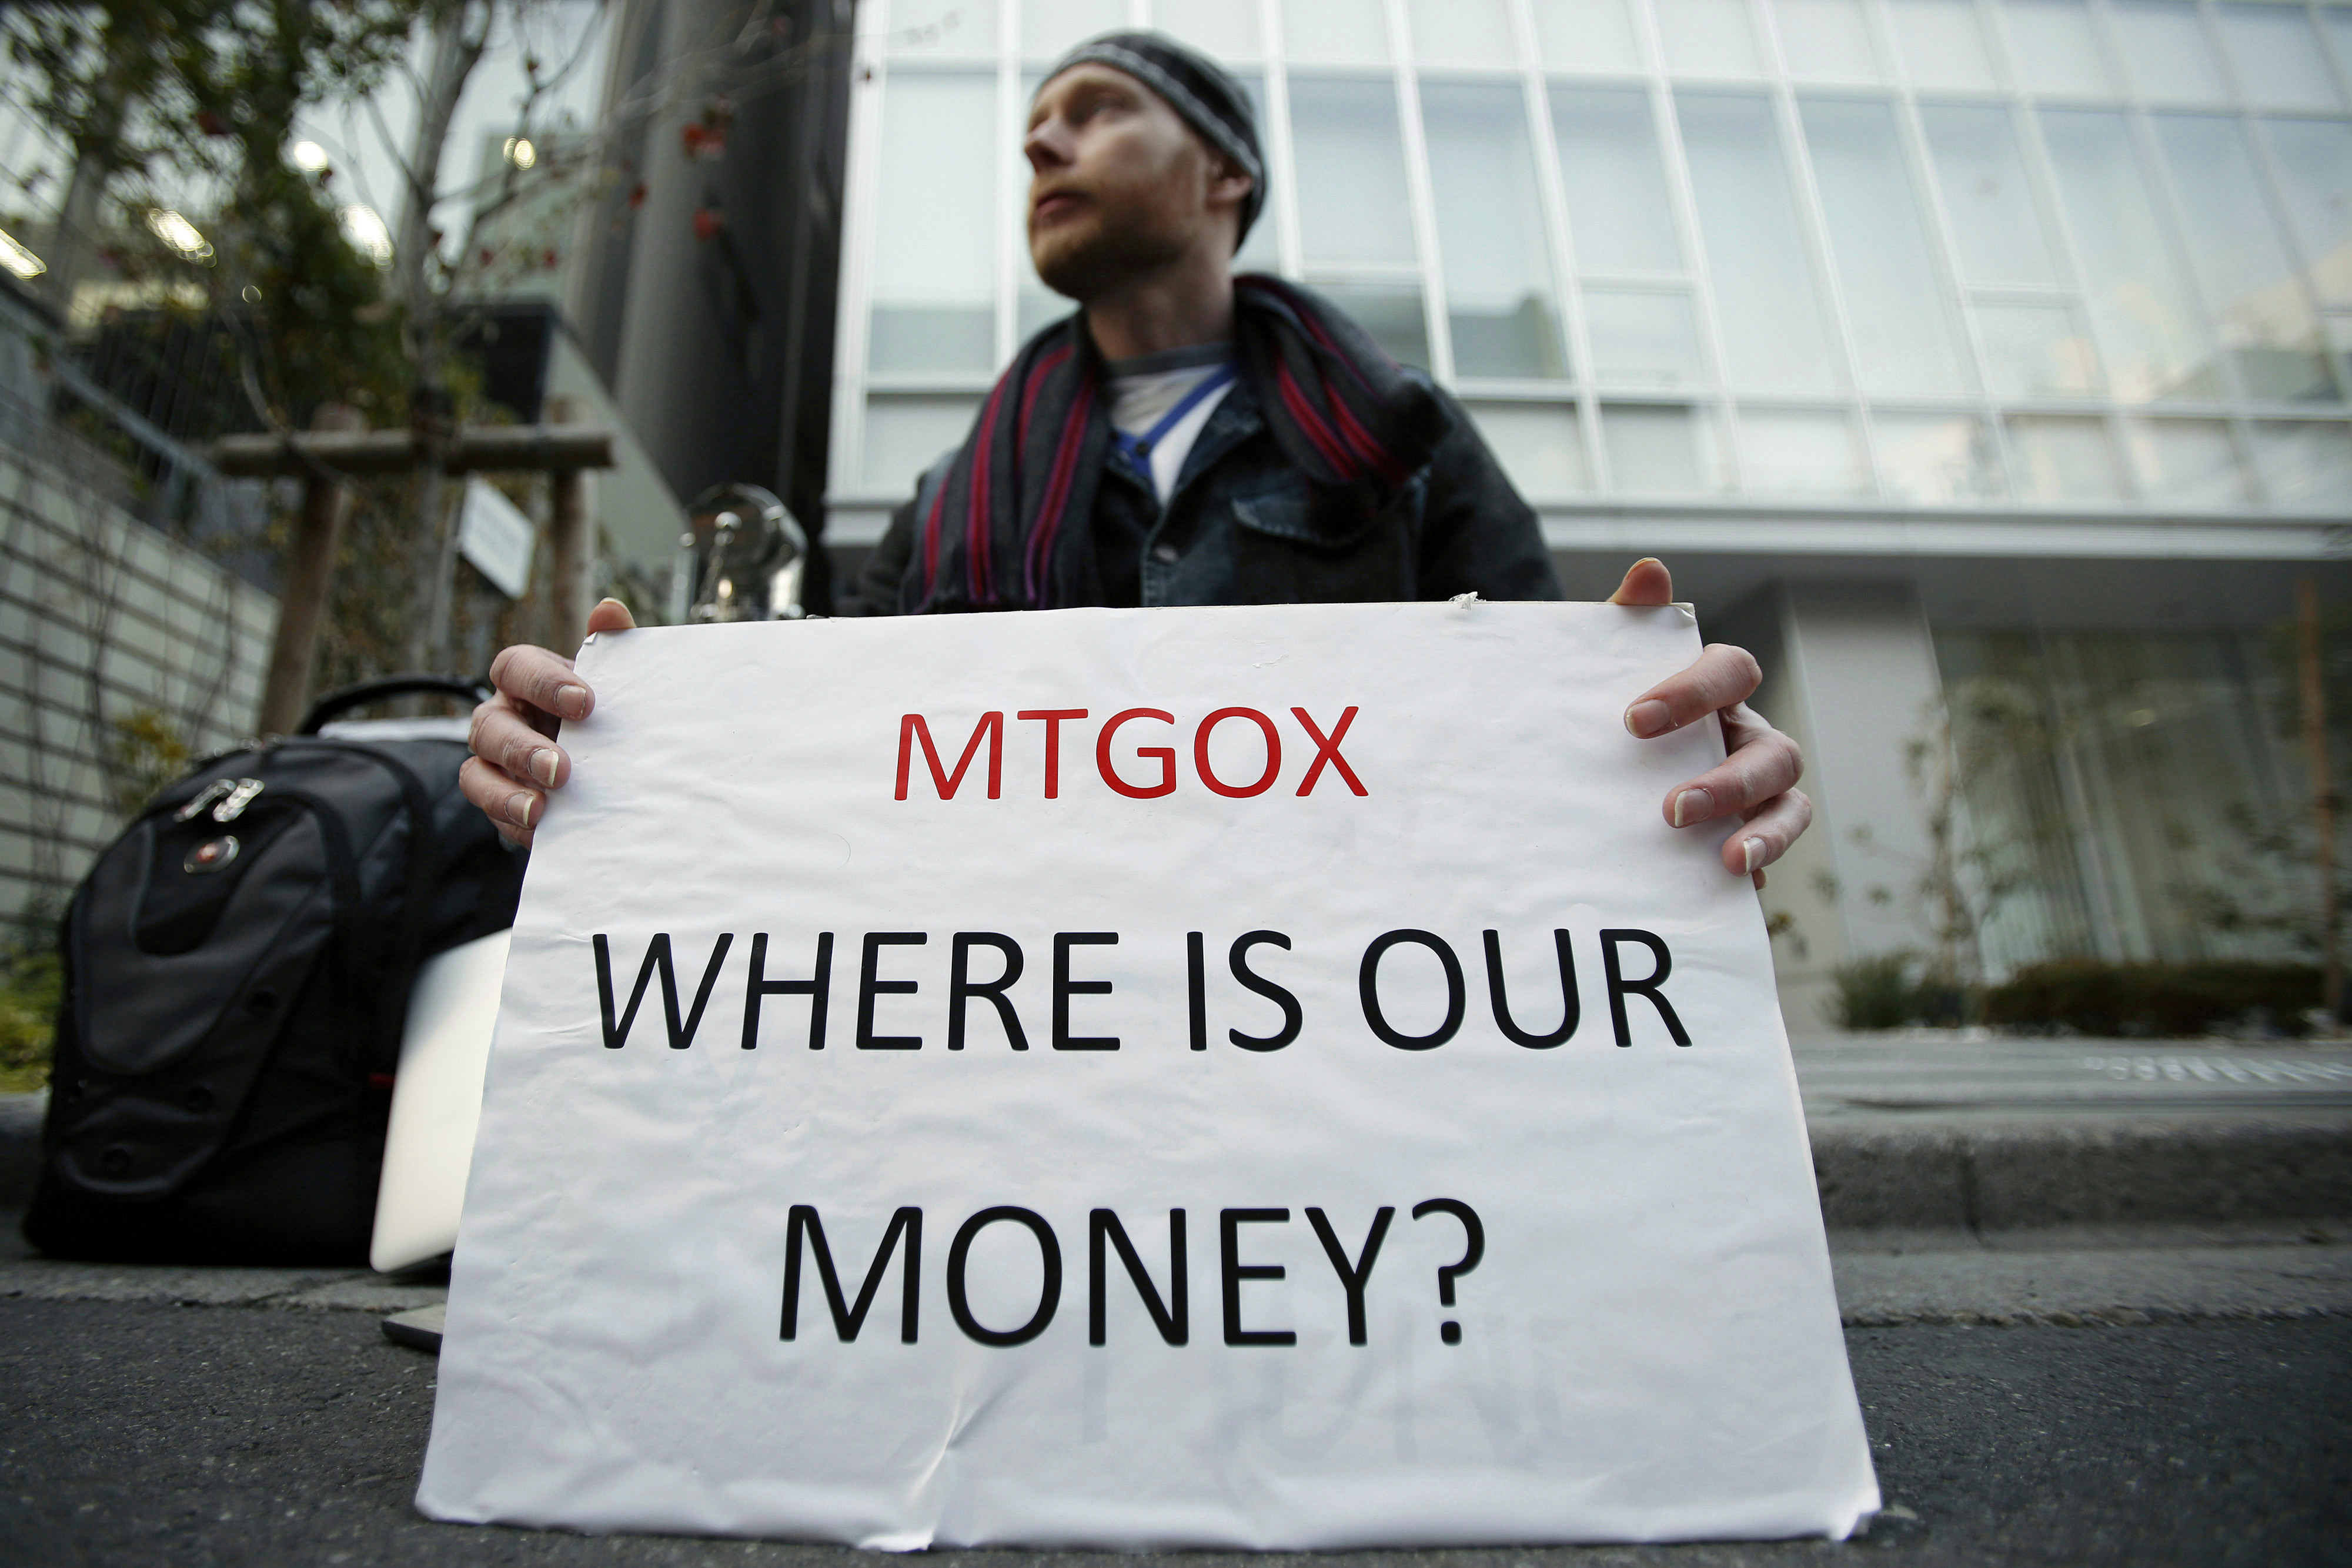 JED MCCALEB SUED FOR THE MT. GOX HACKS